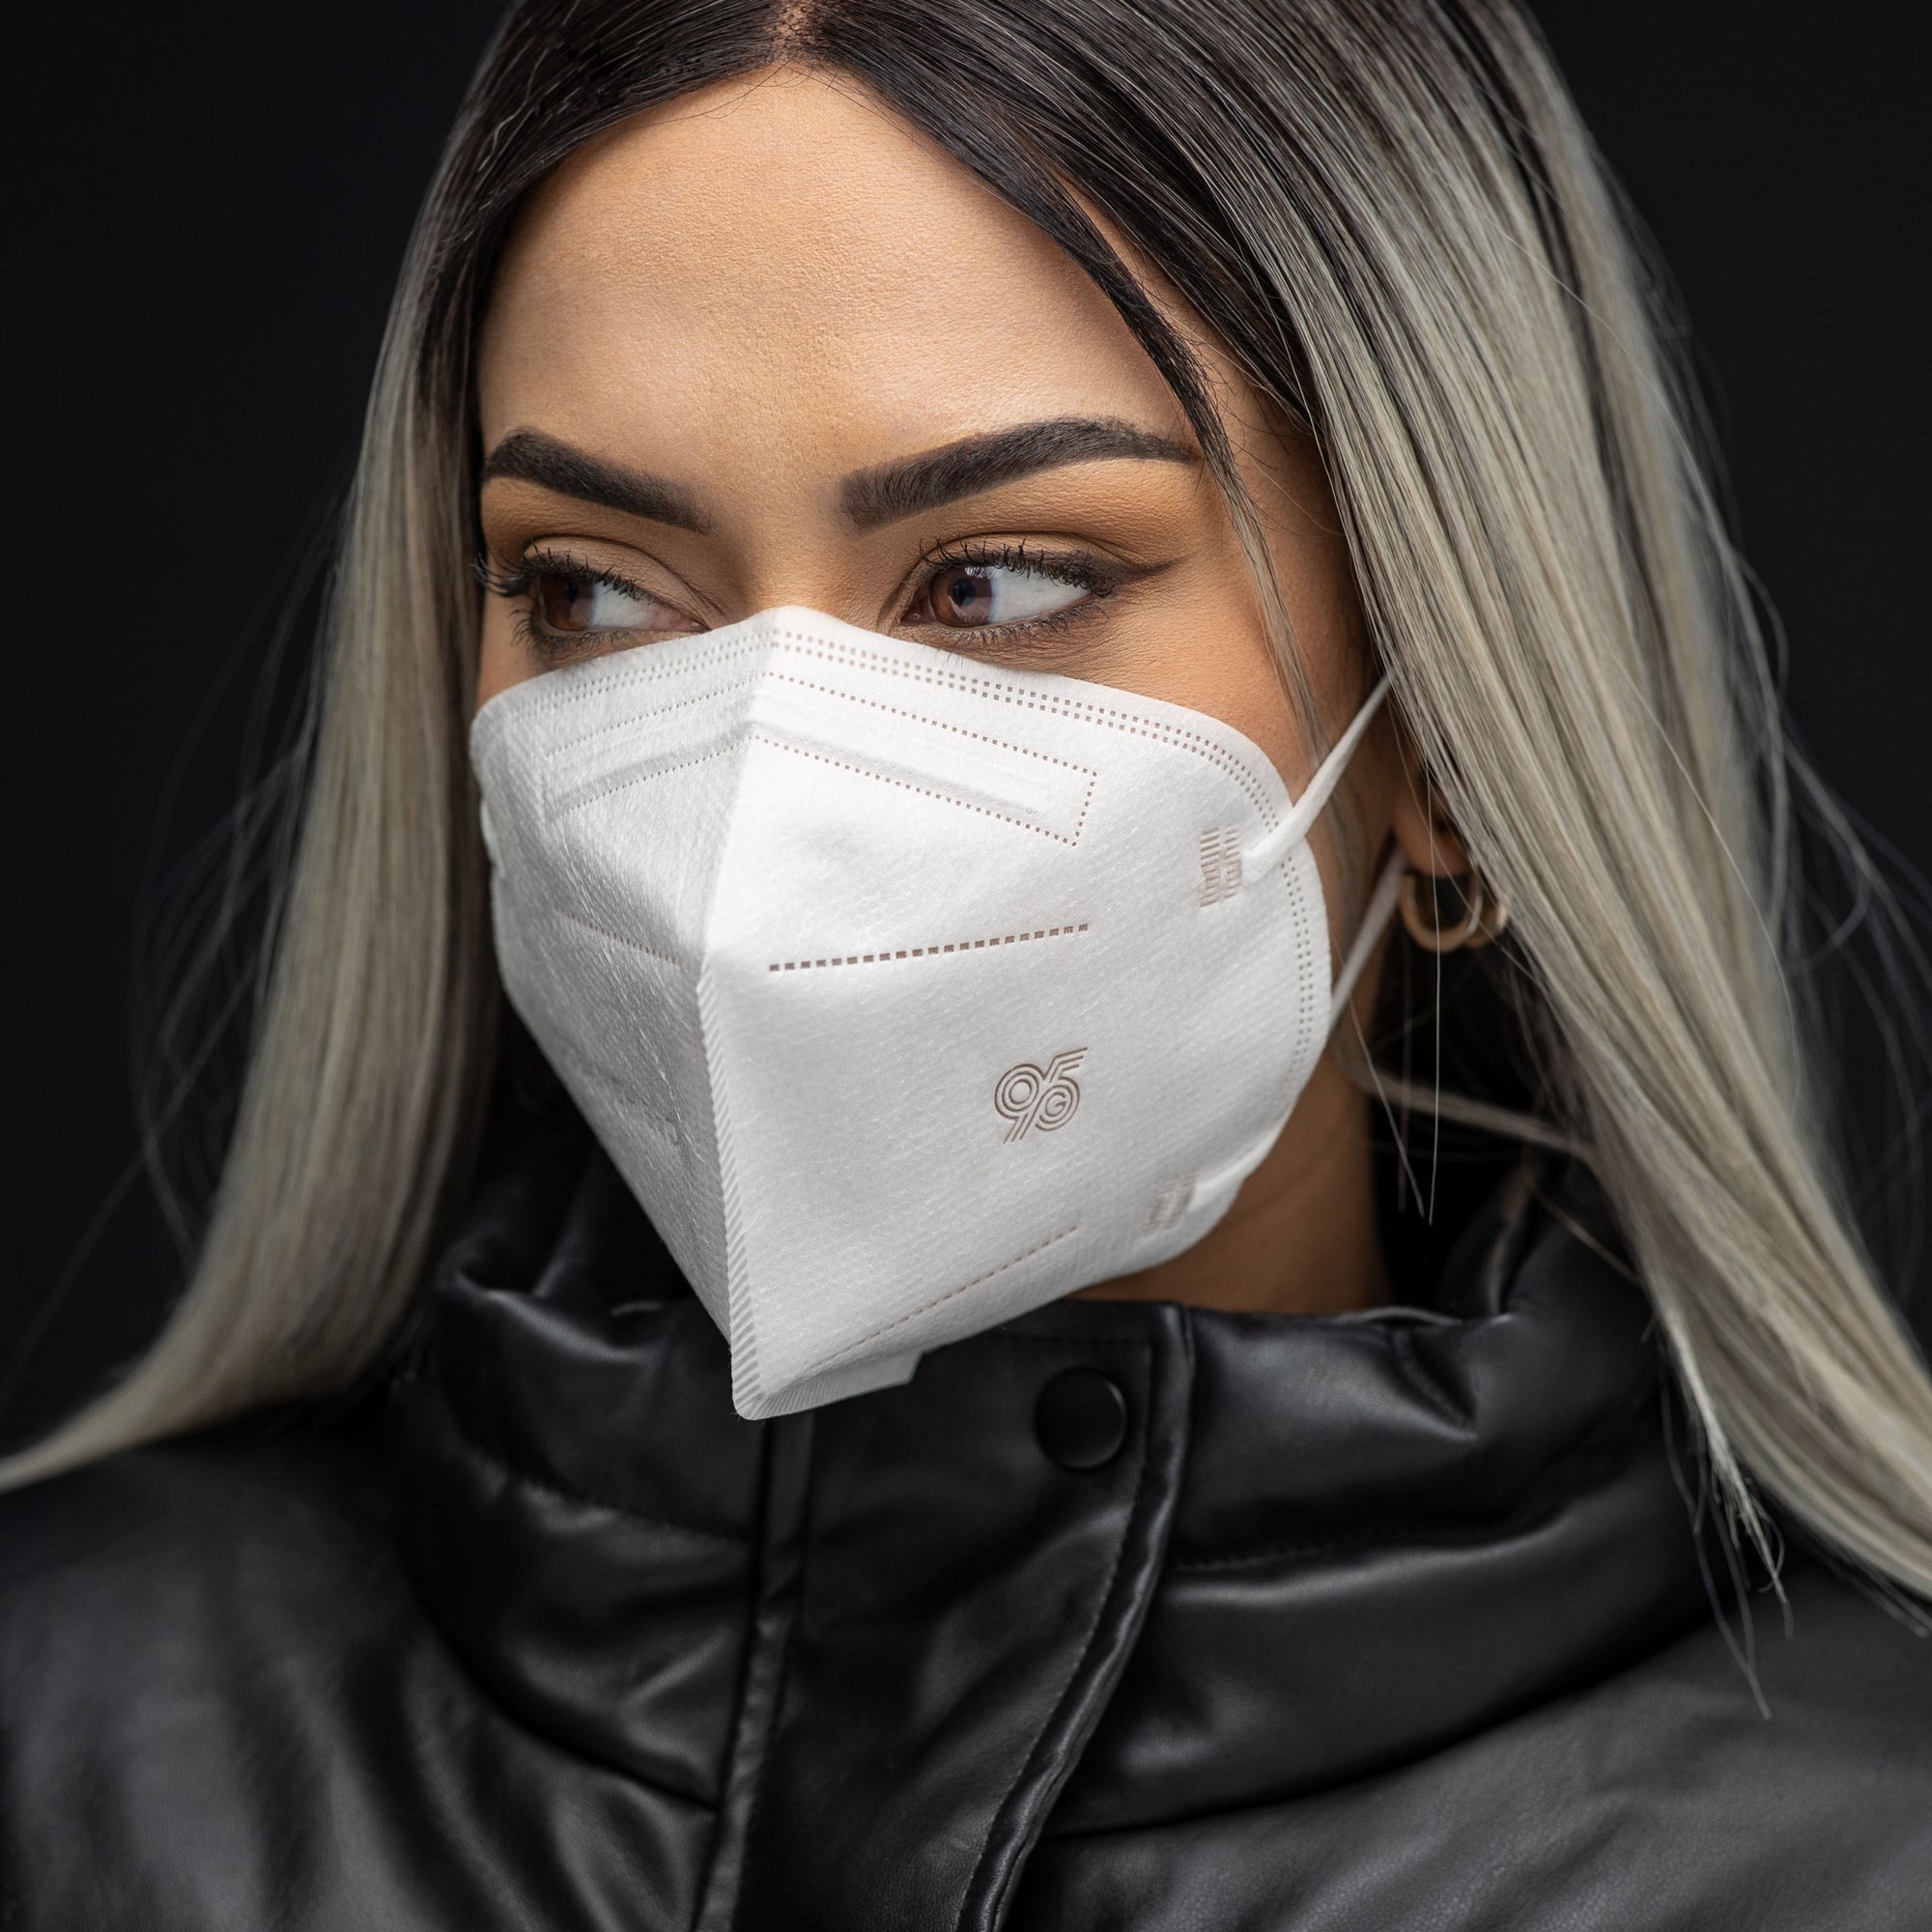 G95 Announces the Launch of the Sustainable, Biodegradable, Plant-Based  'Oceanshield' Mask & Used Mask Return System